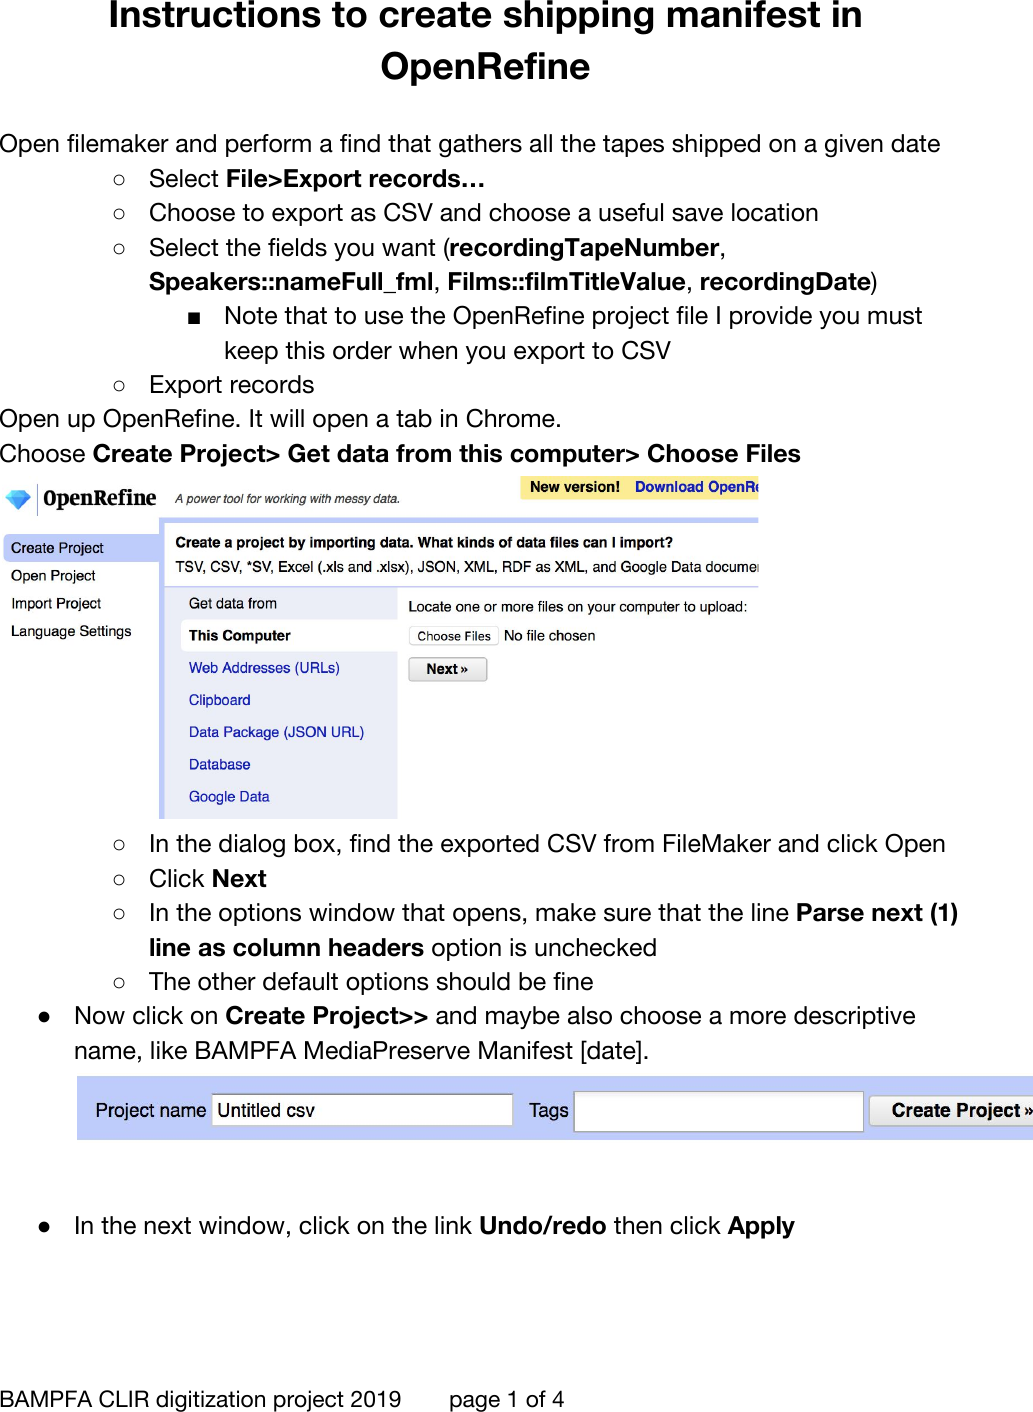 Page 1 of 4 - Openrefine-shipping-manifest-instructions